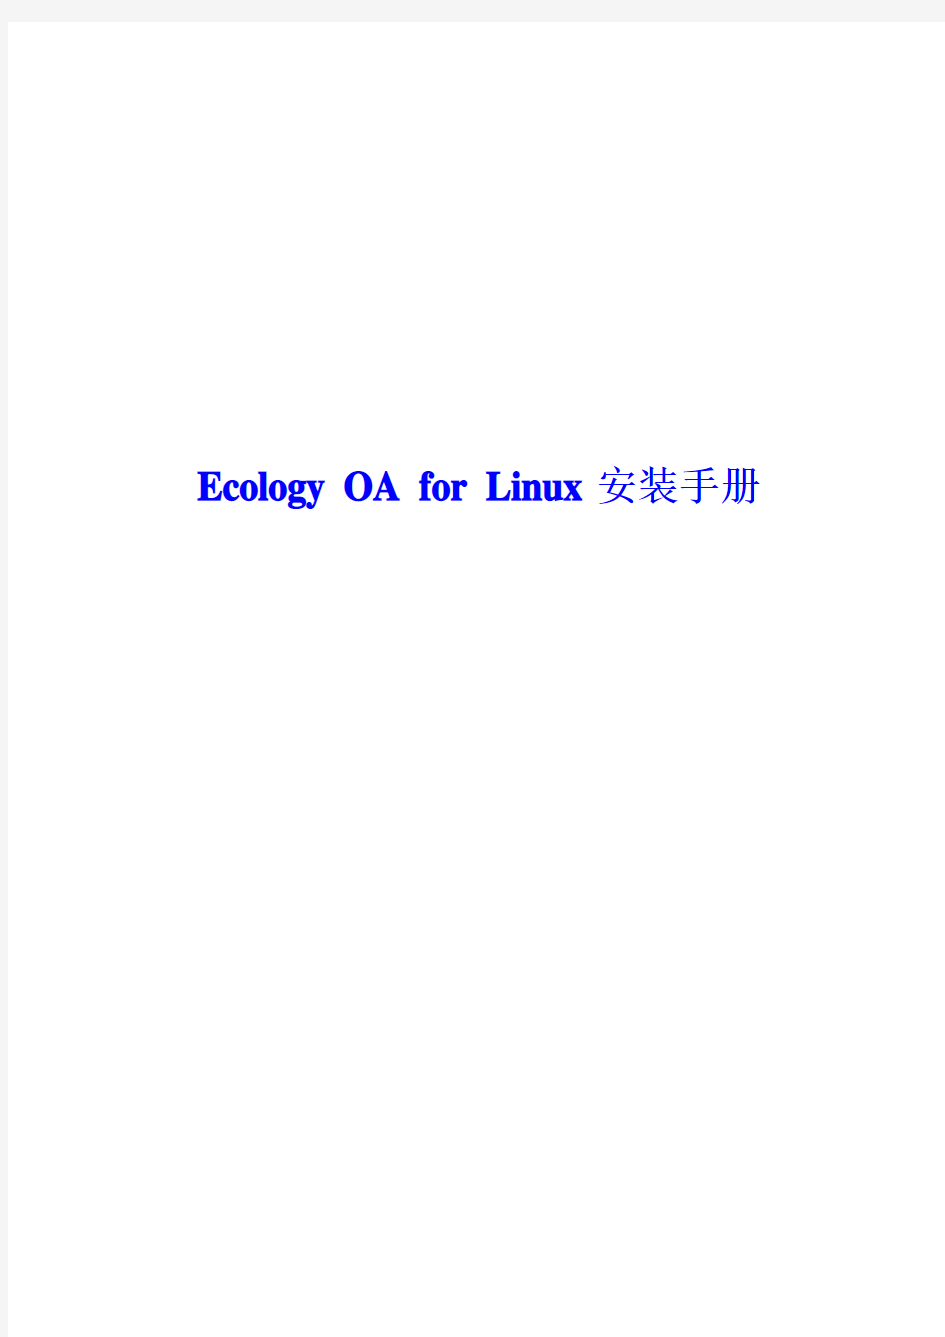 Ecology_OA_for_Linux安装手册